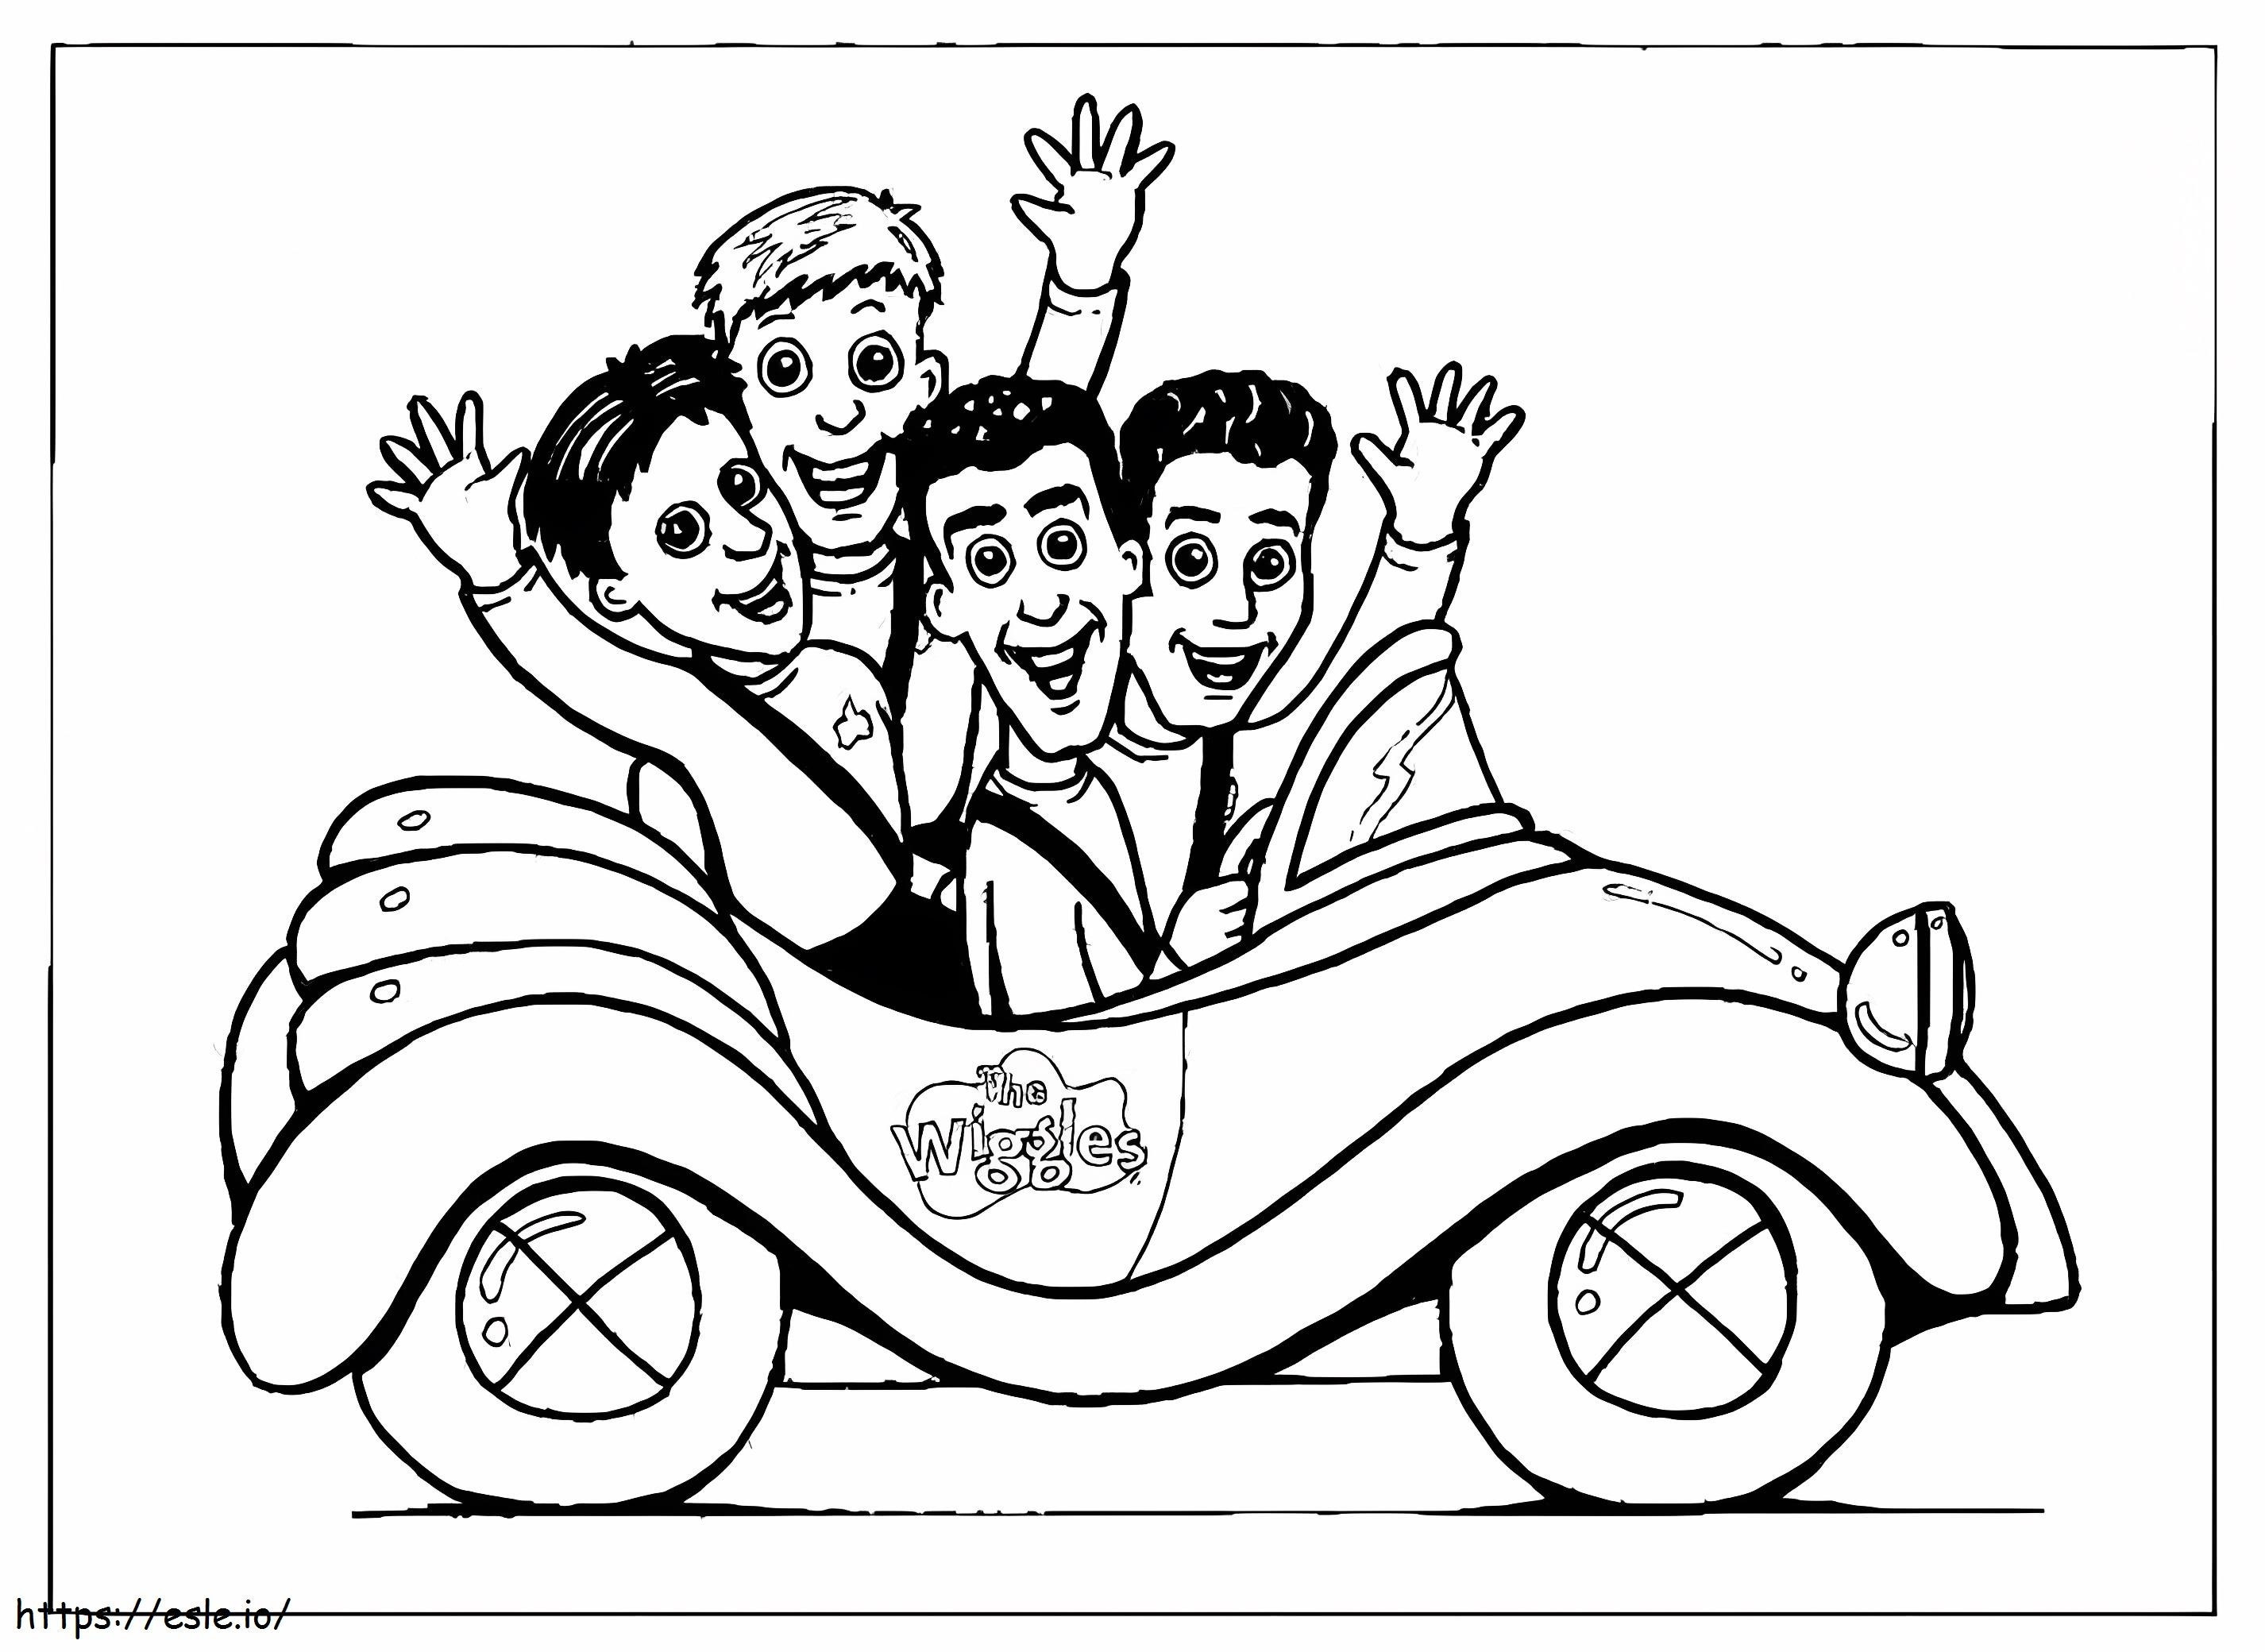 Wiggles Drive A Car coloring page